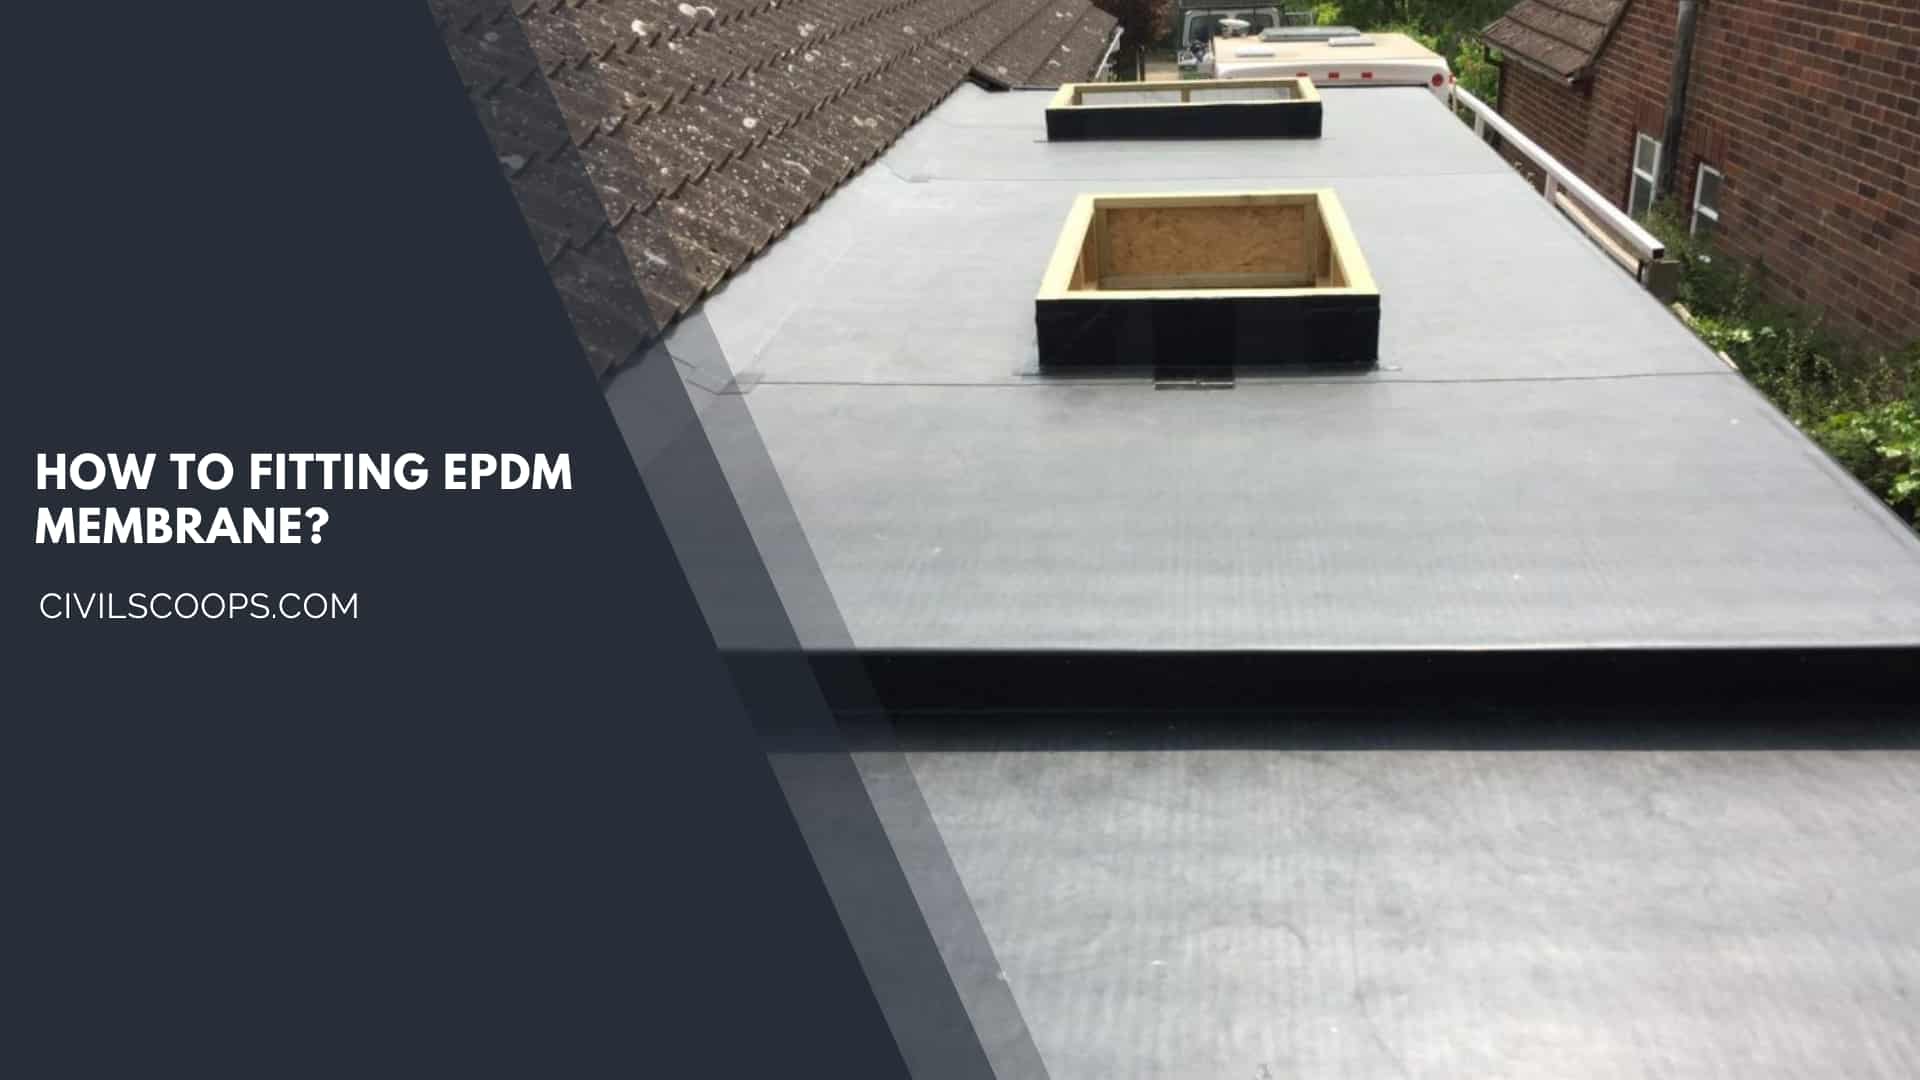 How to Fitting EPDM Membrane?